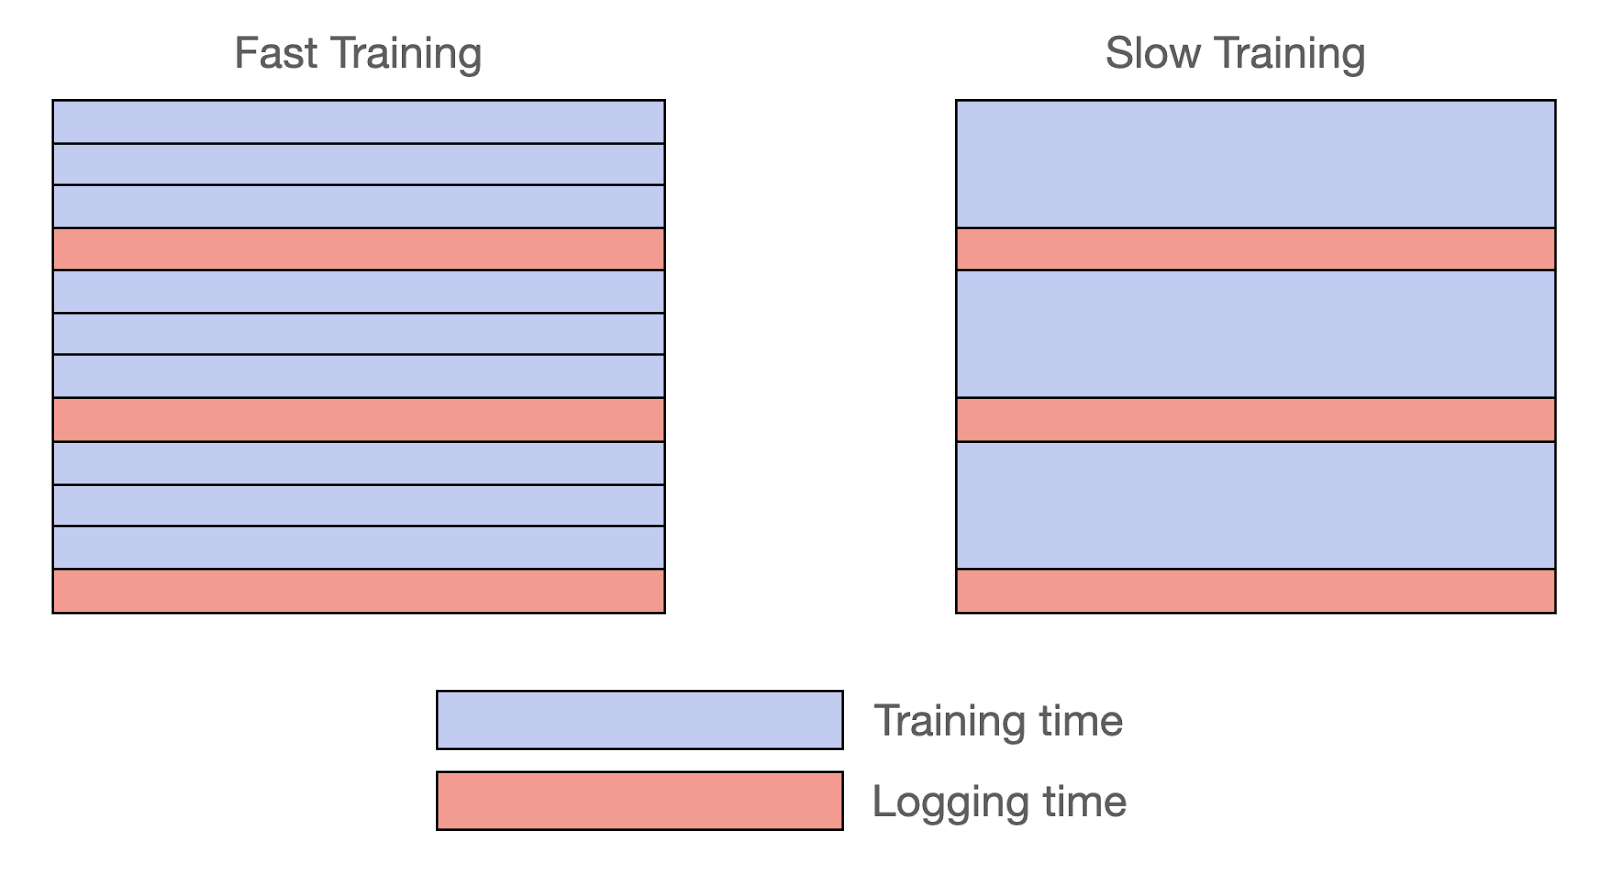 MLflow logging optimizations help to reduce latency for both short and long training lifecycles.